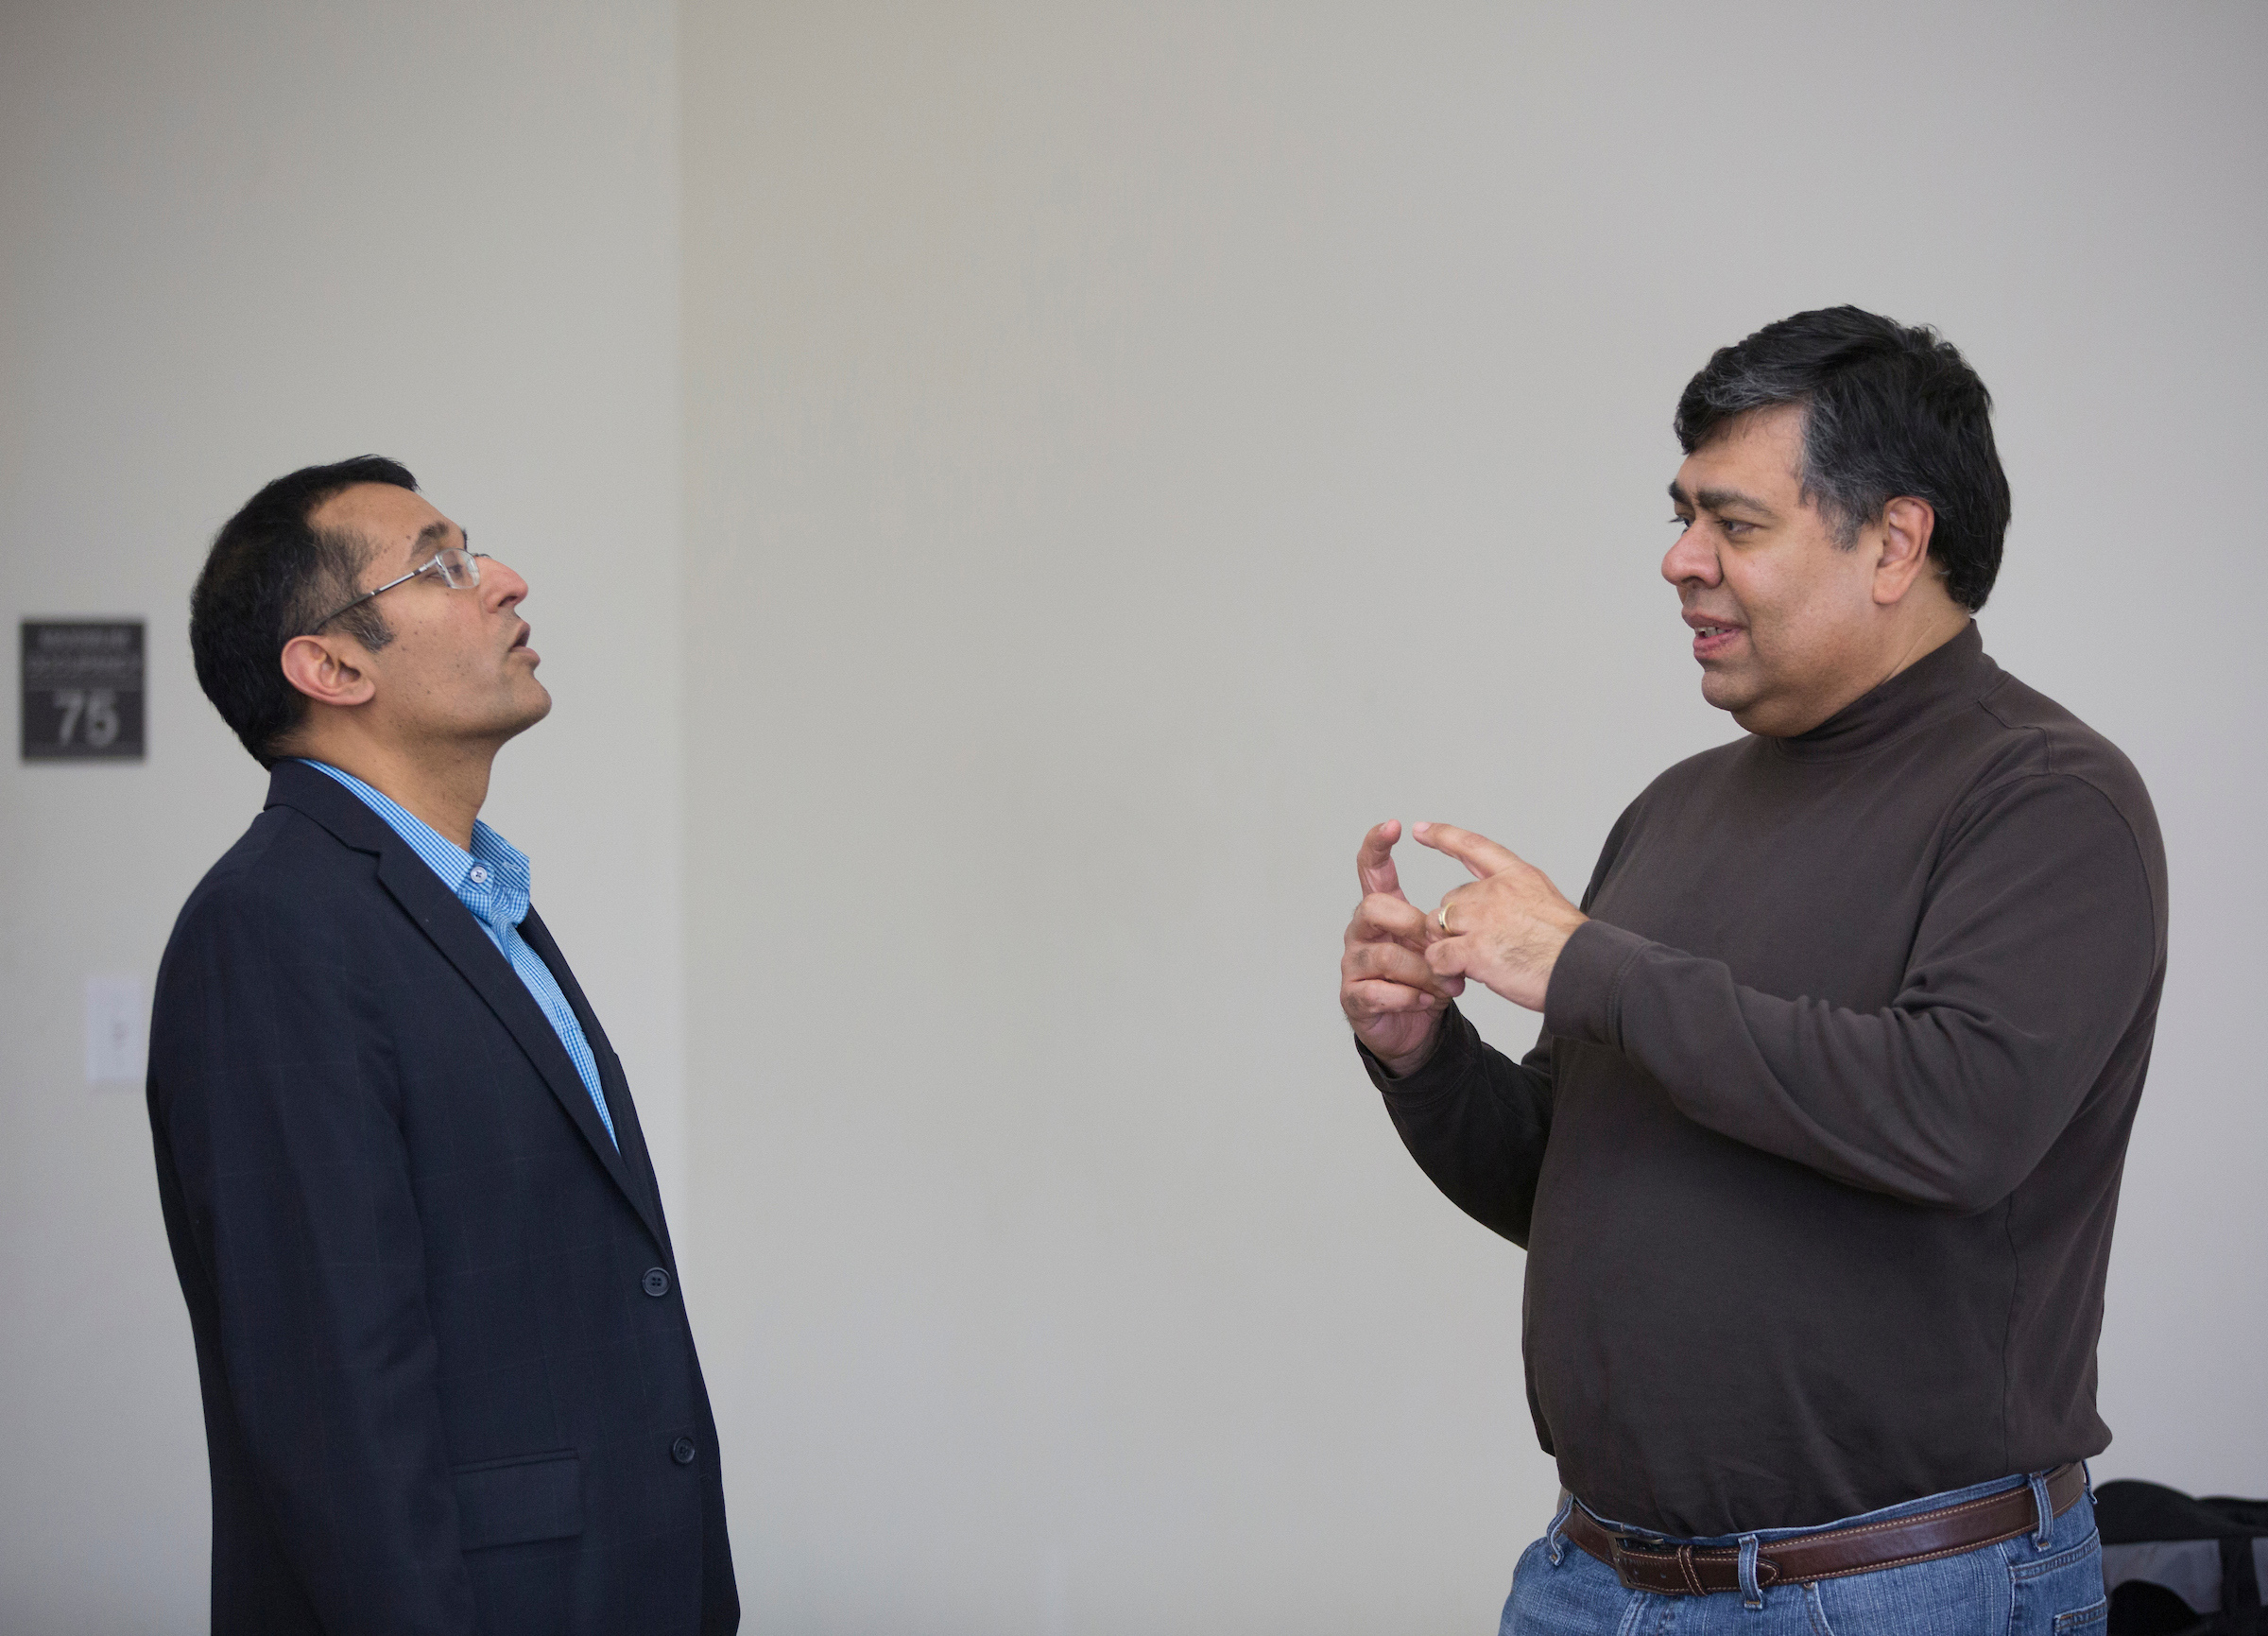 Henry Balani, right, in a discussion with Professor of Management Praveen Parboteeah, who established the DBA program at UW-Whitewater.